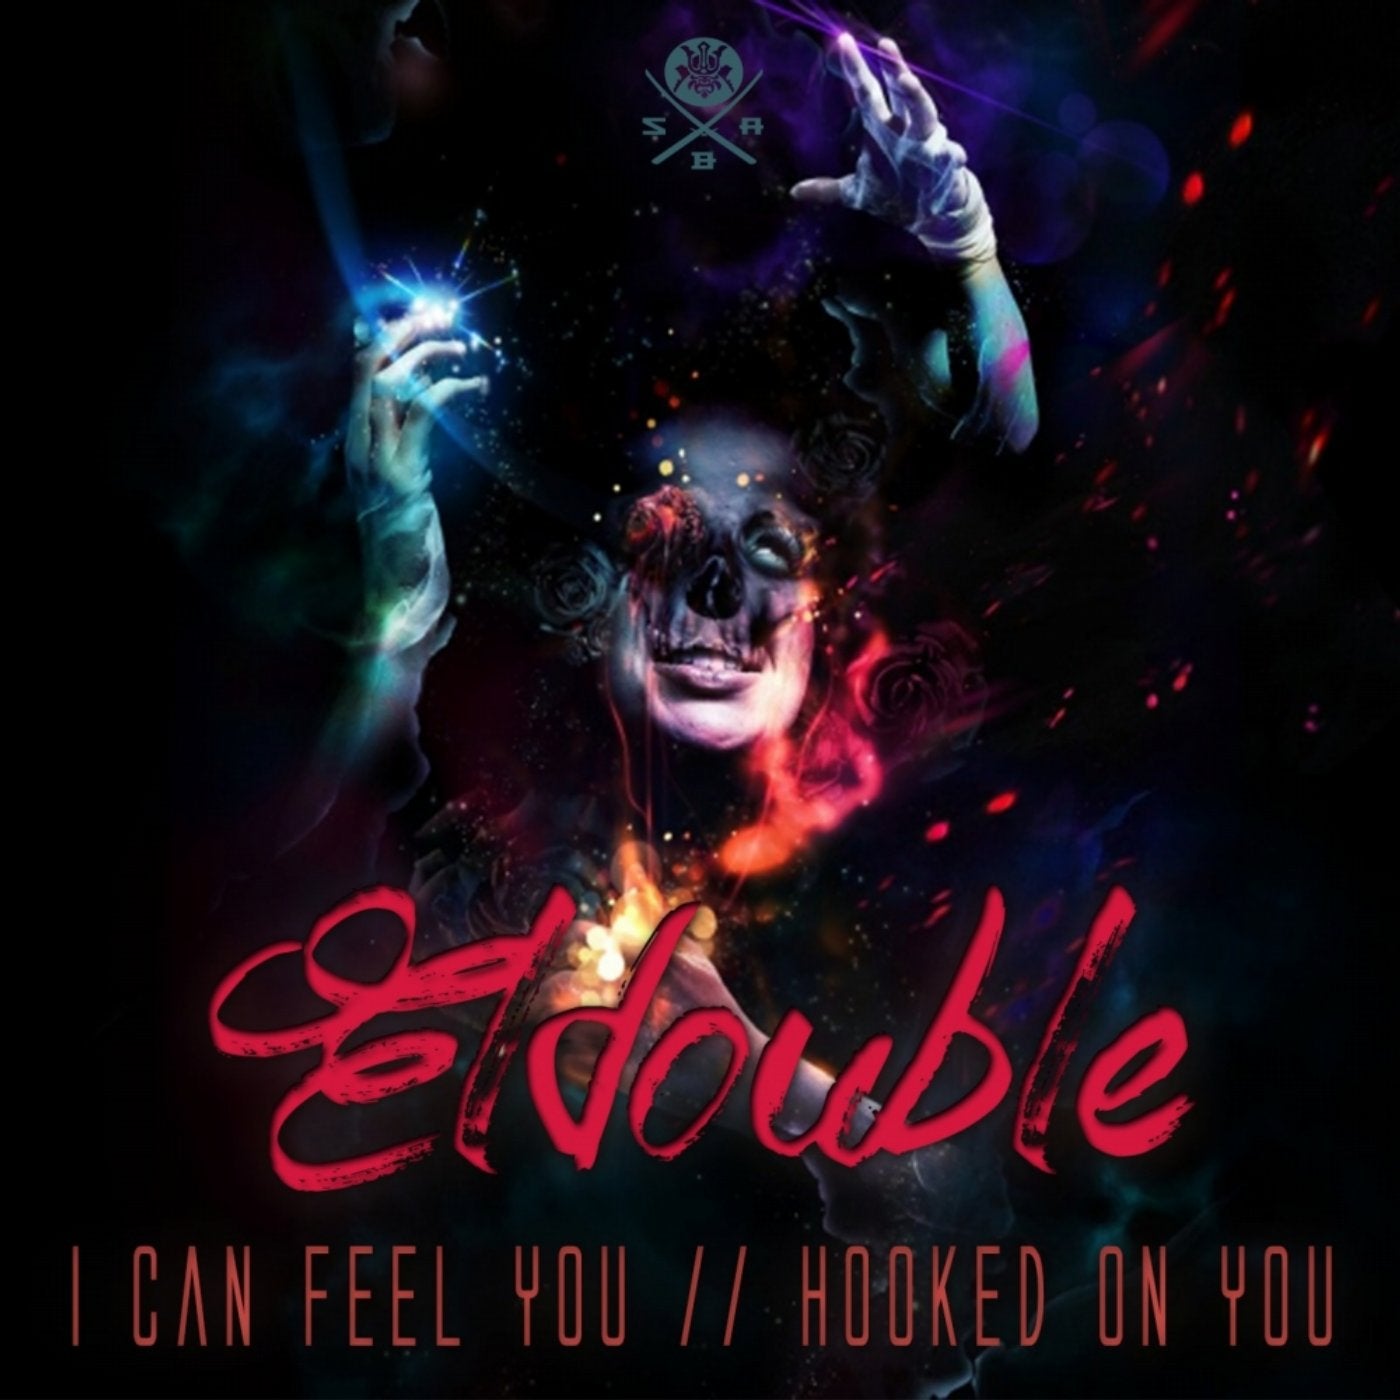 I Can Feel You / Hooked On You